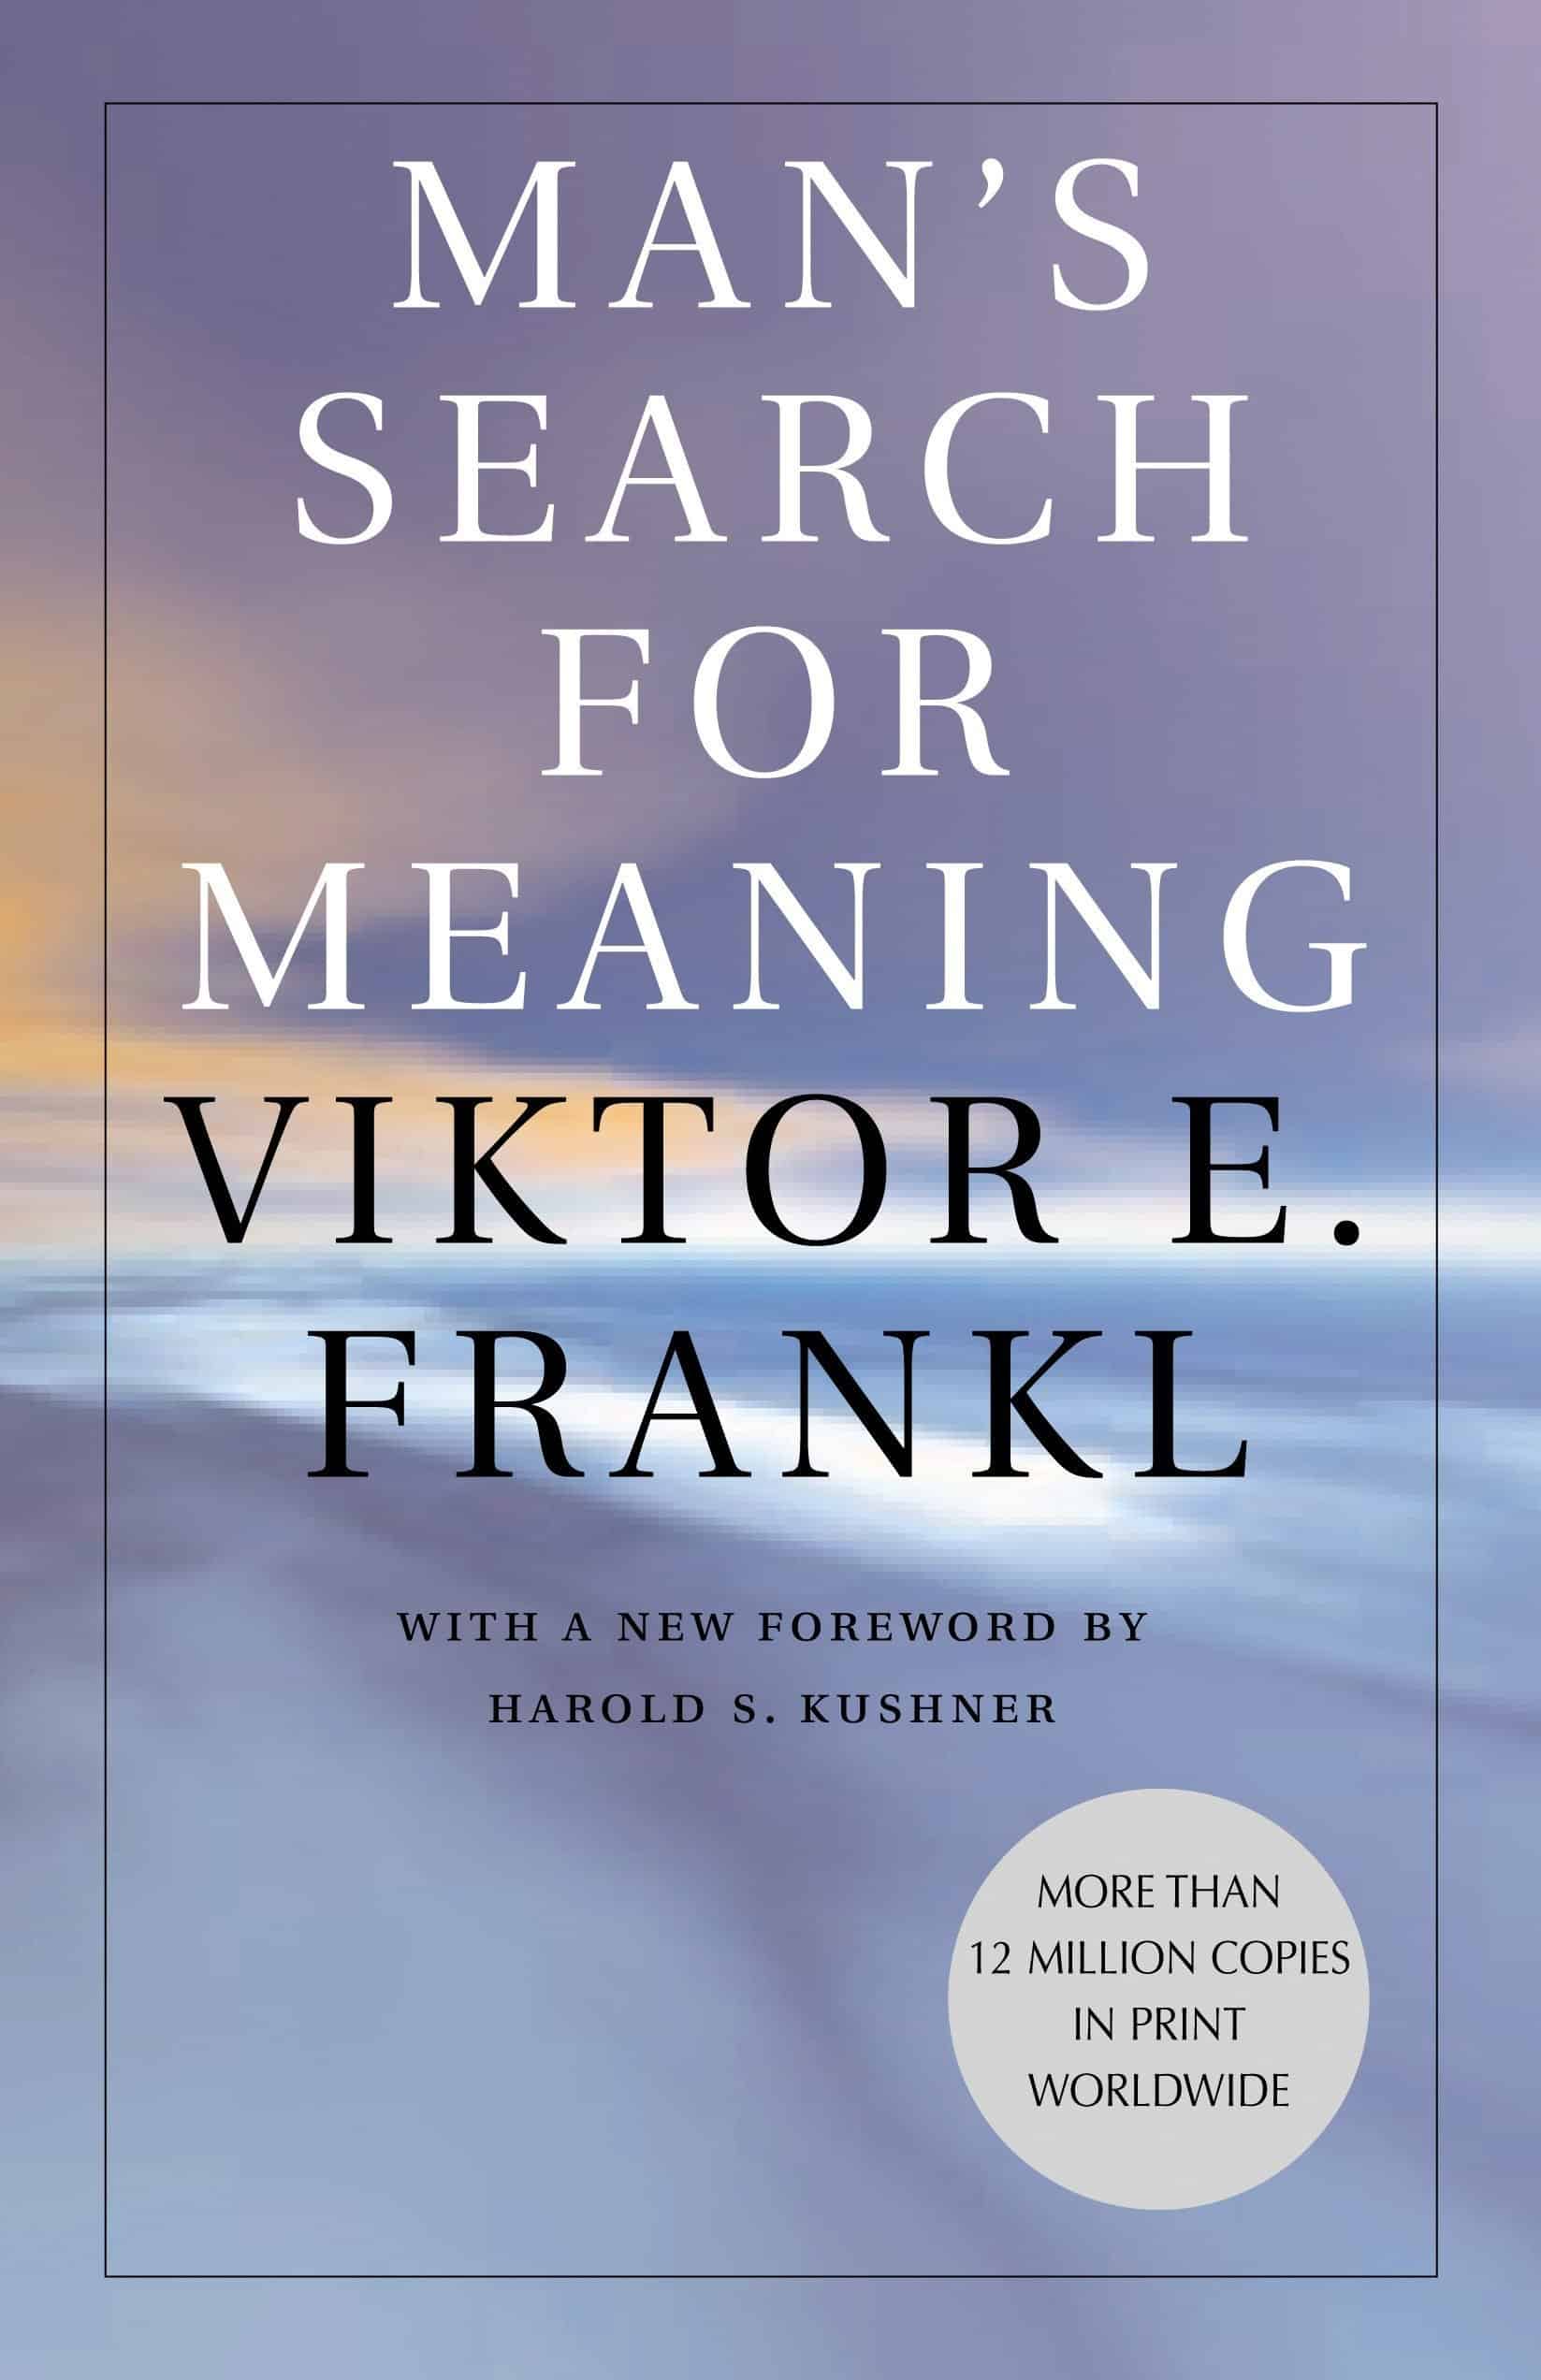 Man’s Search For Meaning by Victor. E. Frankl - Best Book